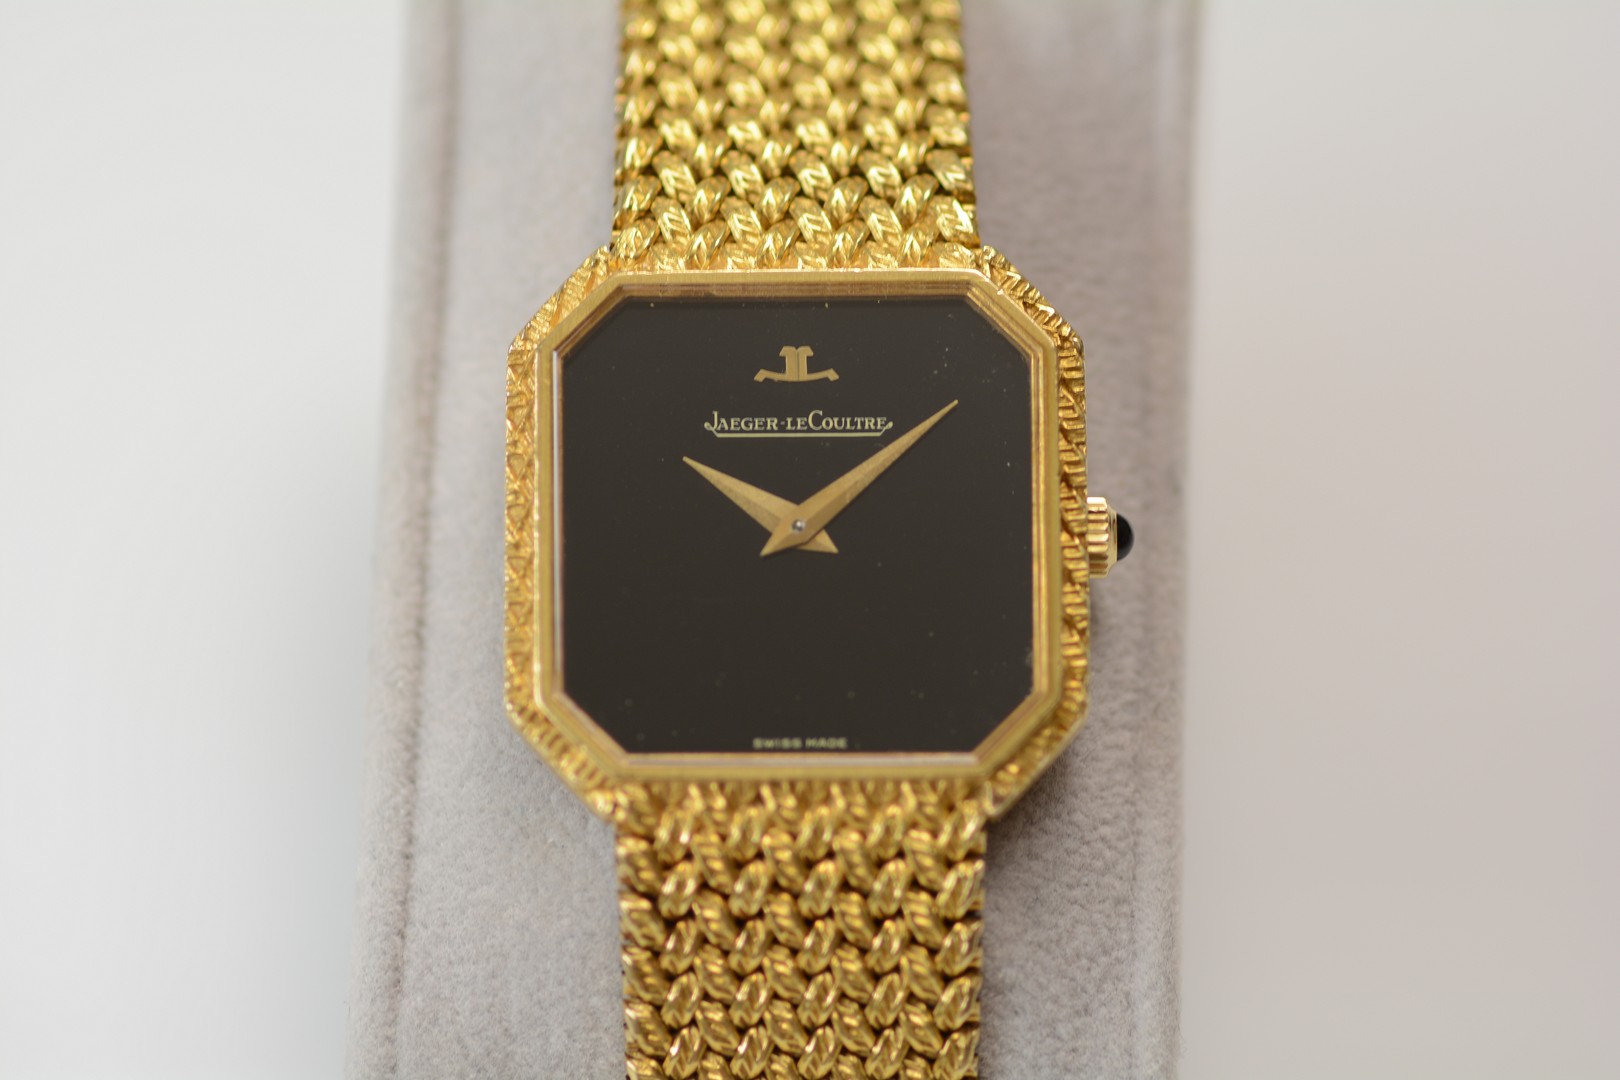 Jaeger-LeCoultre / Vintage - Unisex Yellow Gold Wristwatch - Image 6 of 14